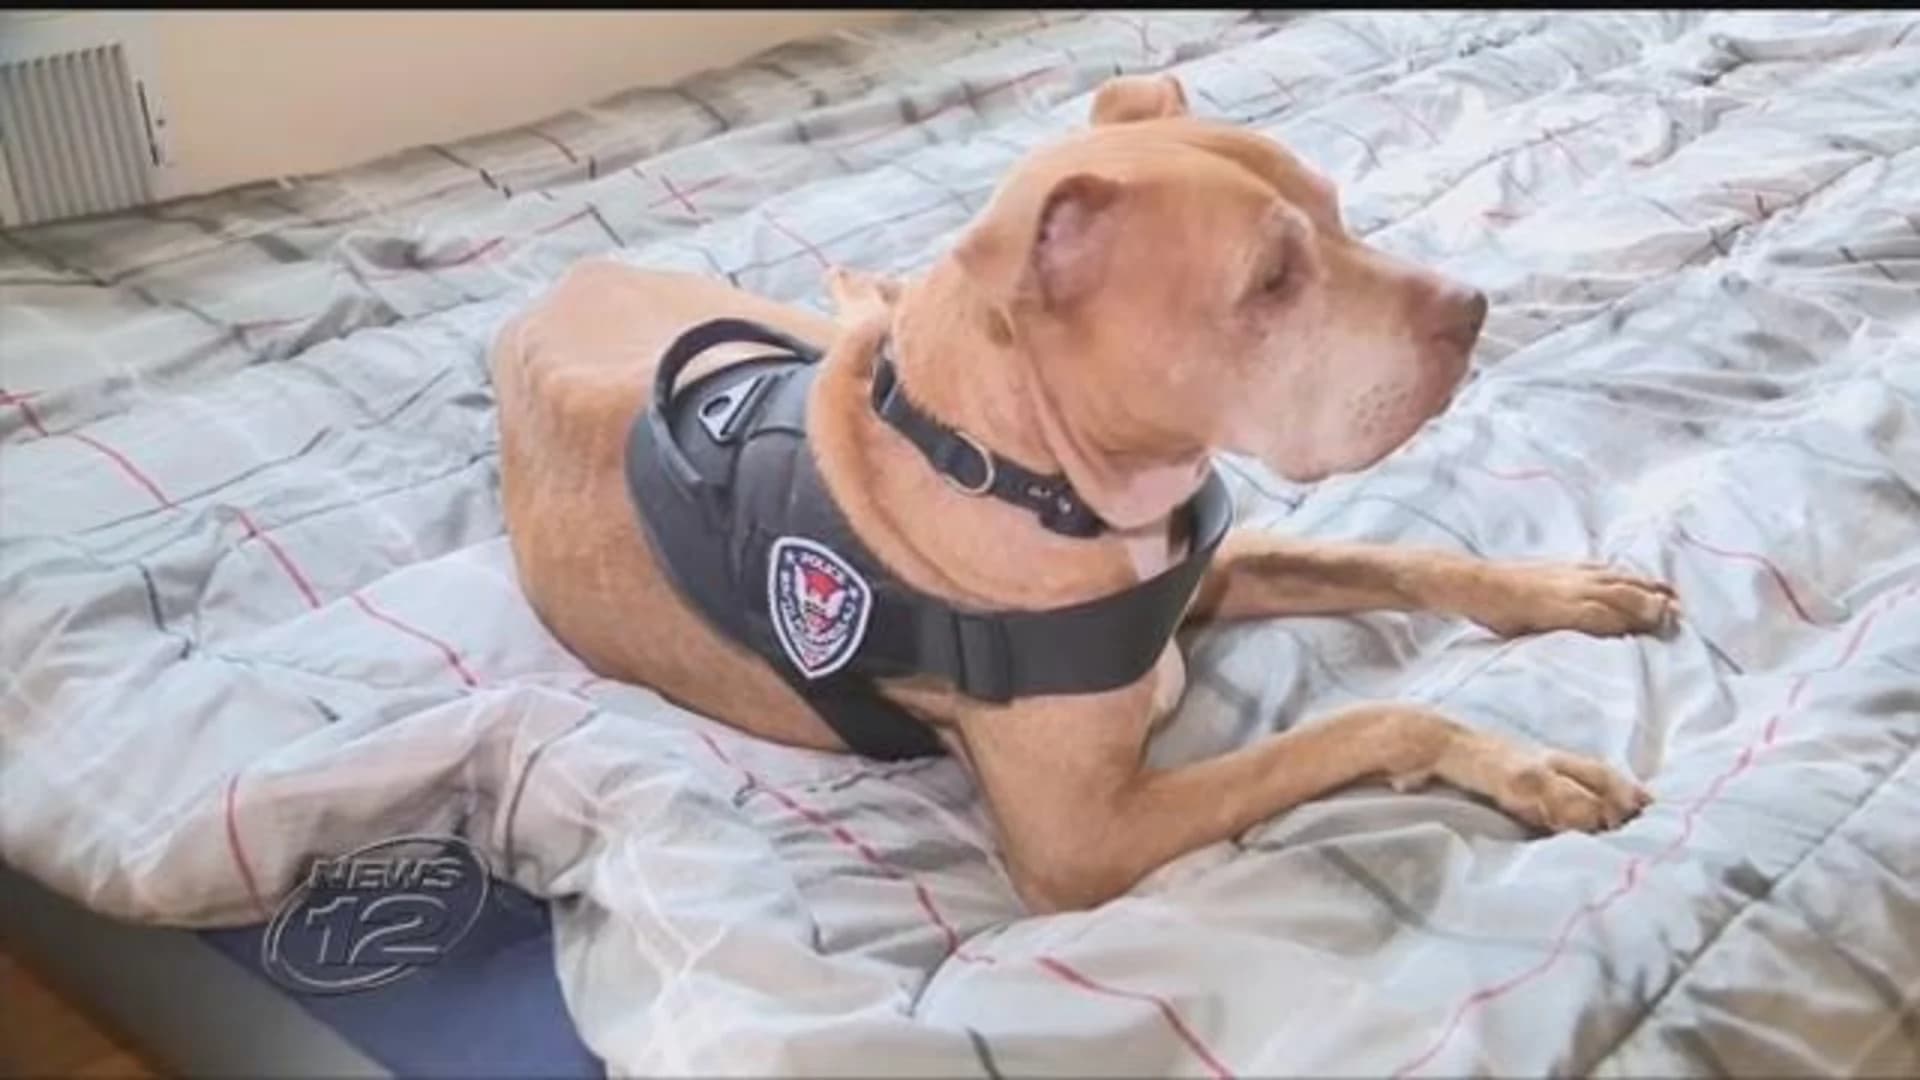 South Plainfield officer fosters dog that was found abandoned, starving